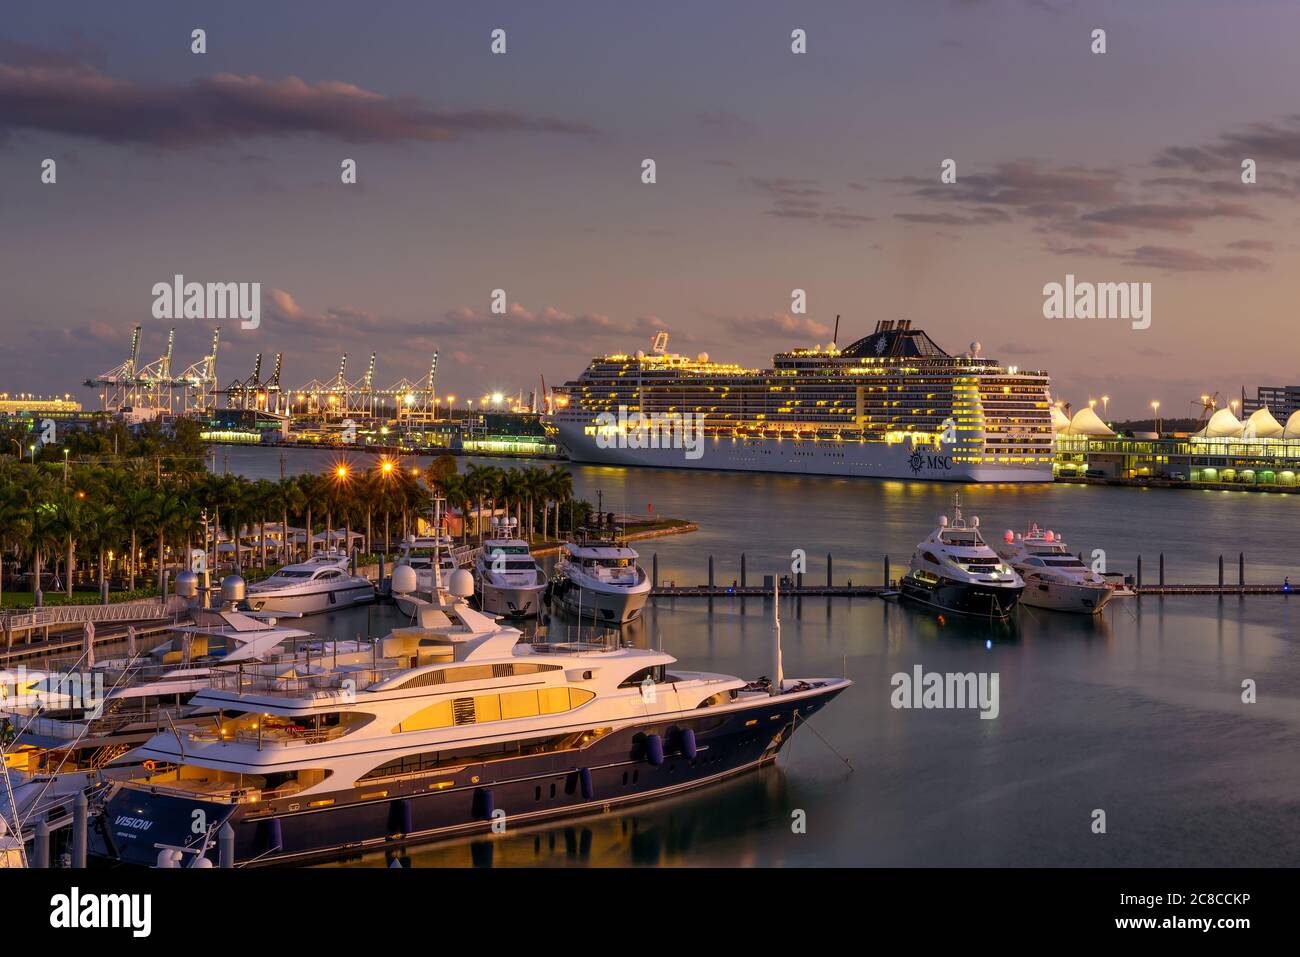 Miami, Florida, USA - January 8, 2020 : MSC Divina cruise ship in the Port of Miami at sunset with multiple luxury yachts in the foreground. Stock Photo